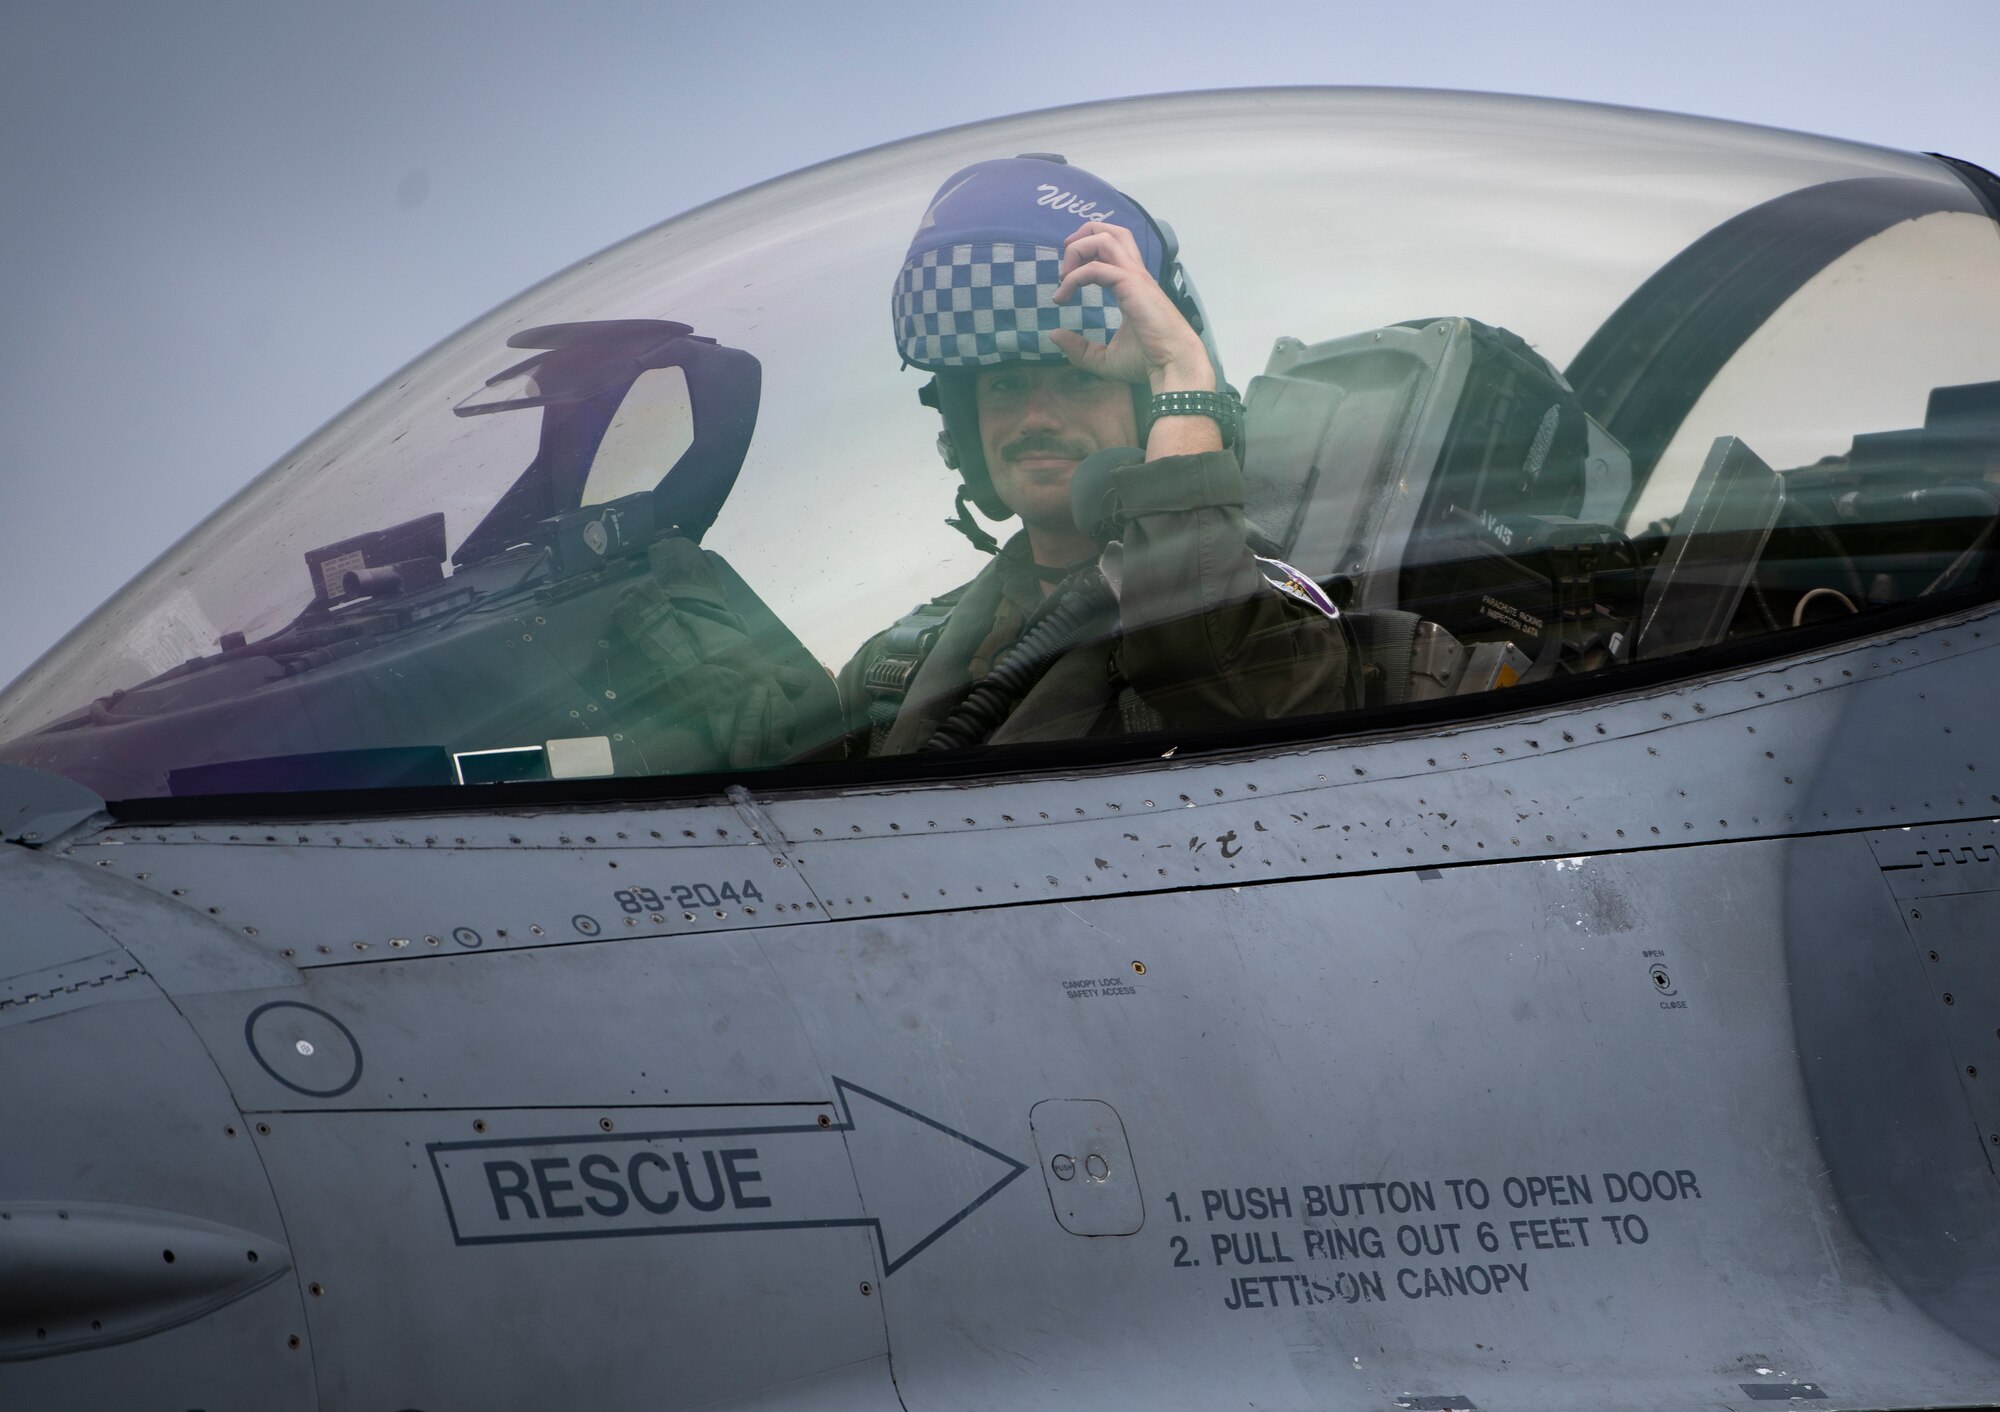 A U.S. Air Force pilot, assigned to the 510th Fighter Squadron, Aviano Air Base, Italy, arrives at Royal Air Force Lakenheath, England, Aug. 28, 2020. Aircraft and Airmen from the 510th FS are participating in a flying training deployment event to enhance interoperability, maintain joint readiness and strengthen relationships with regional allies and partners. (U.S. Air Force photo by Airman 1st Class Jessi Monte)